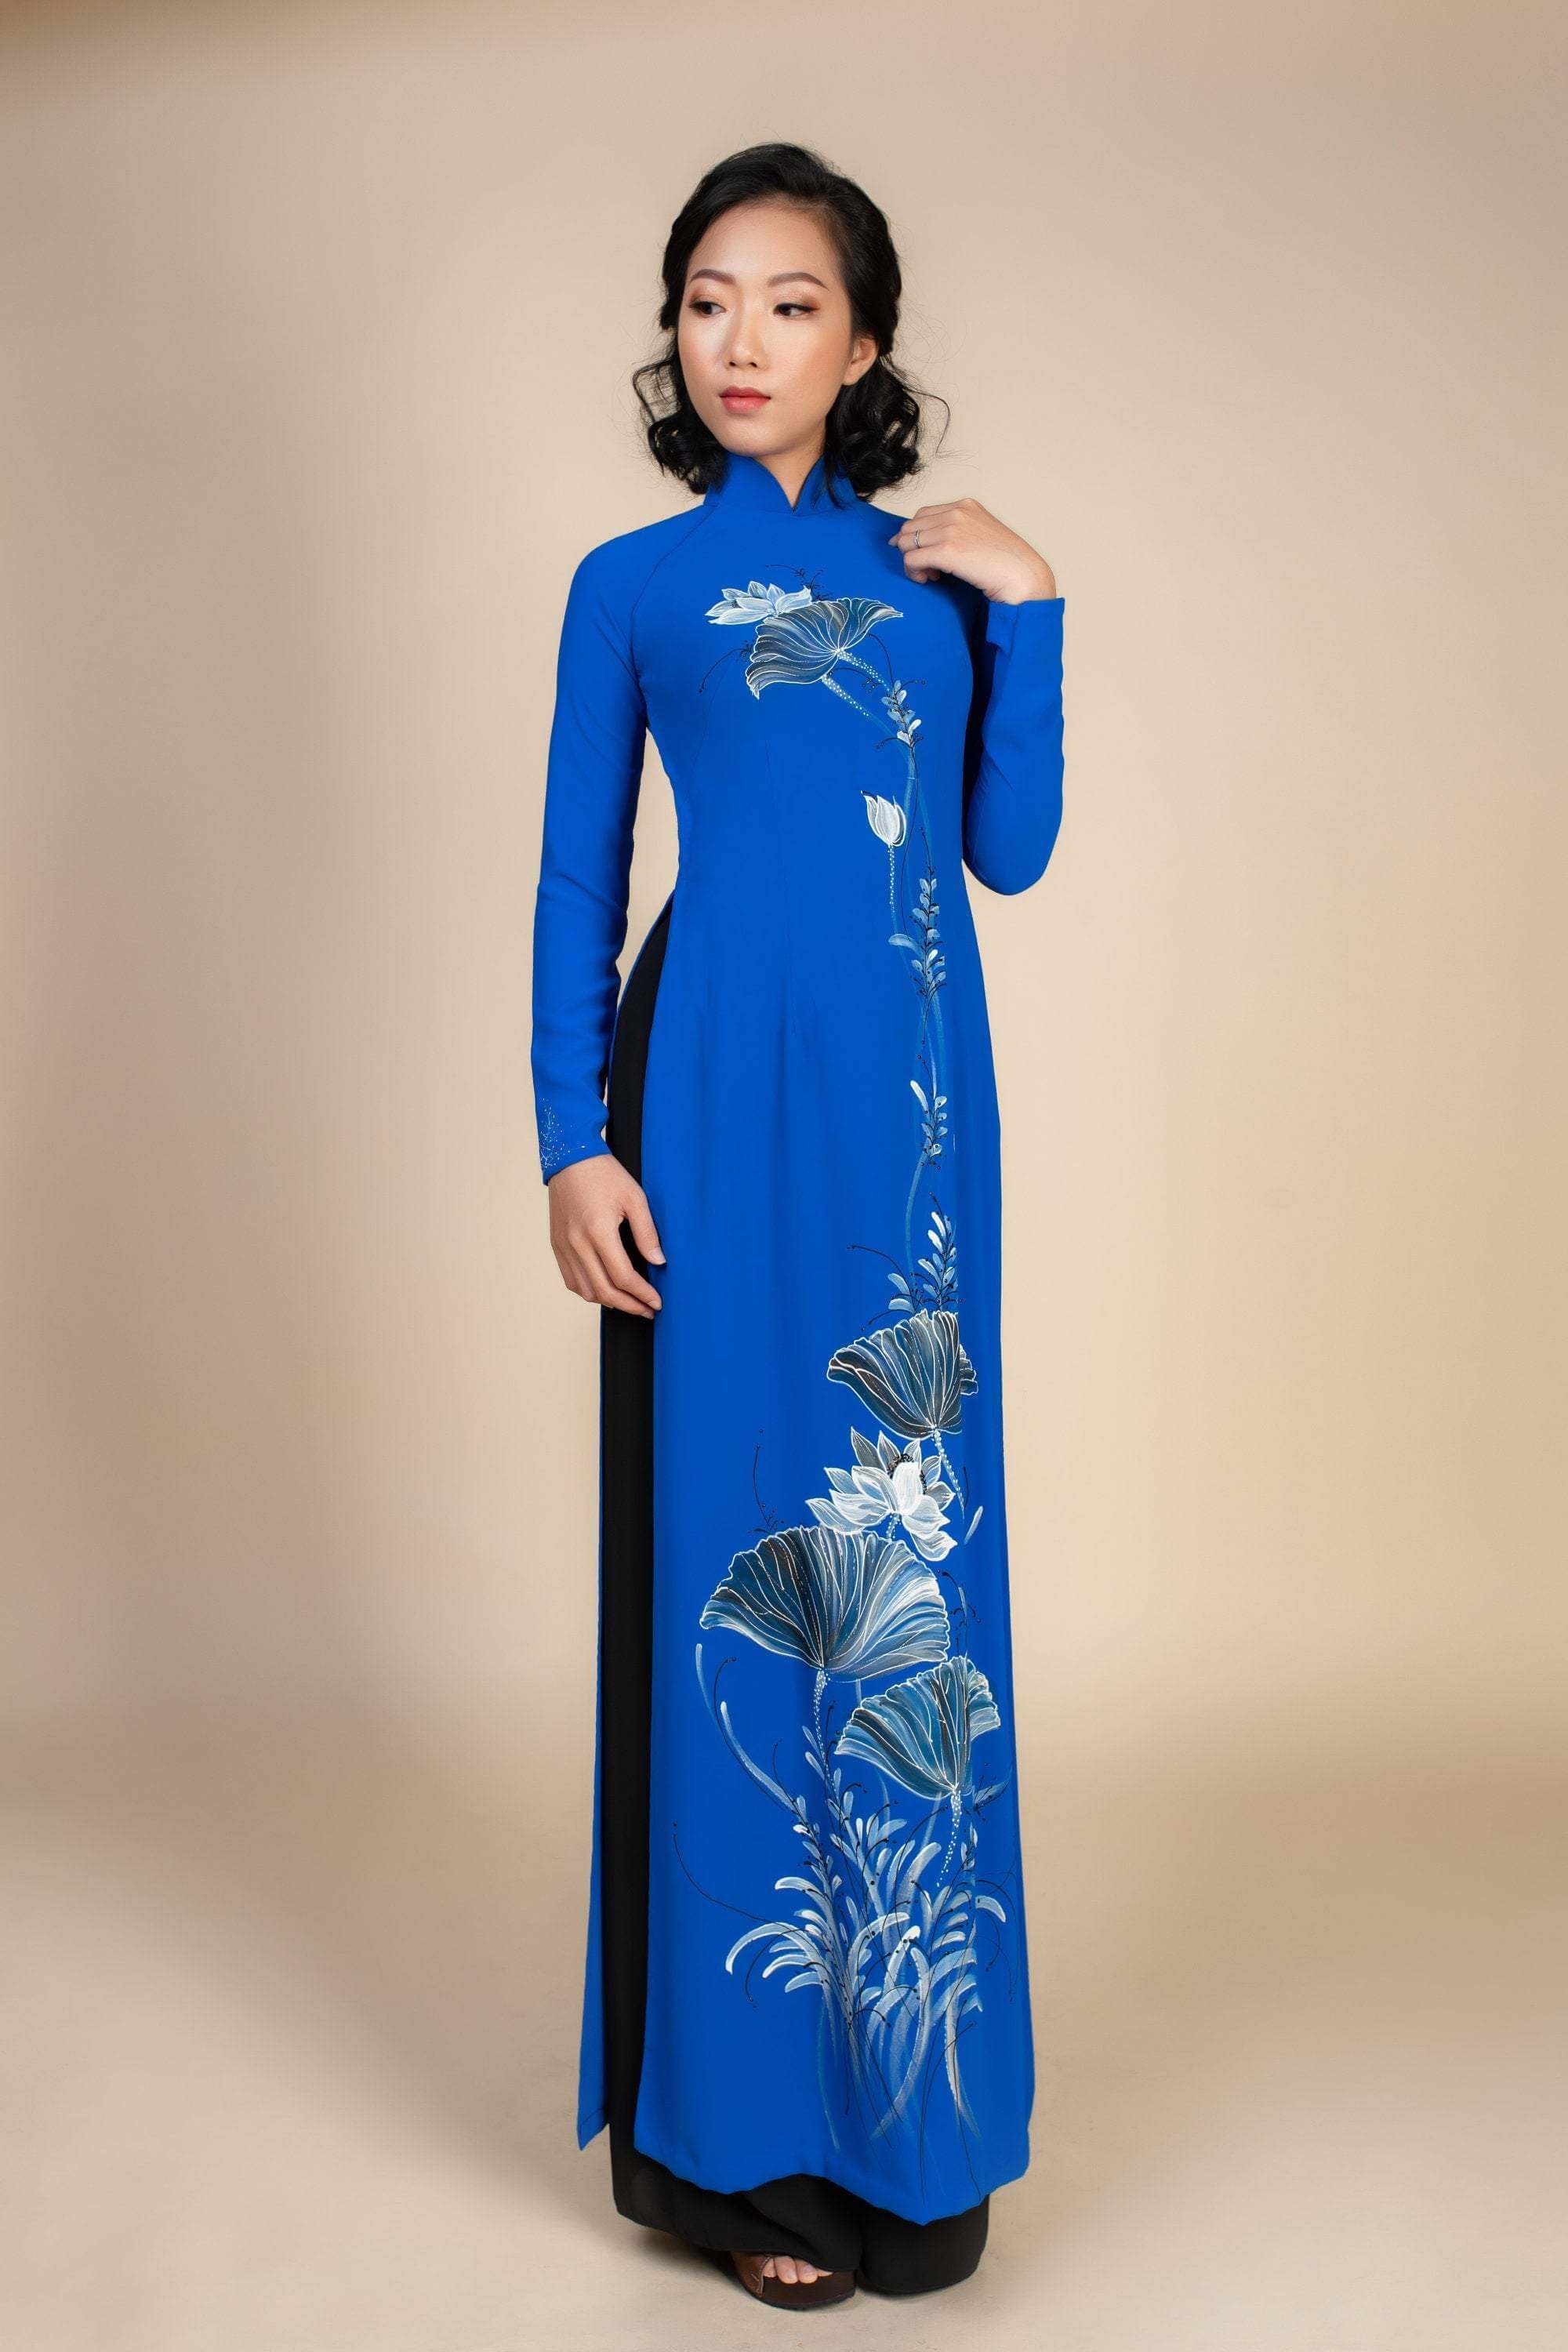 Ao Dai FAQ: Everything you need to know about buying a Vietnamese Ao Dai dress